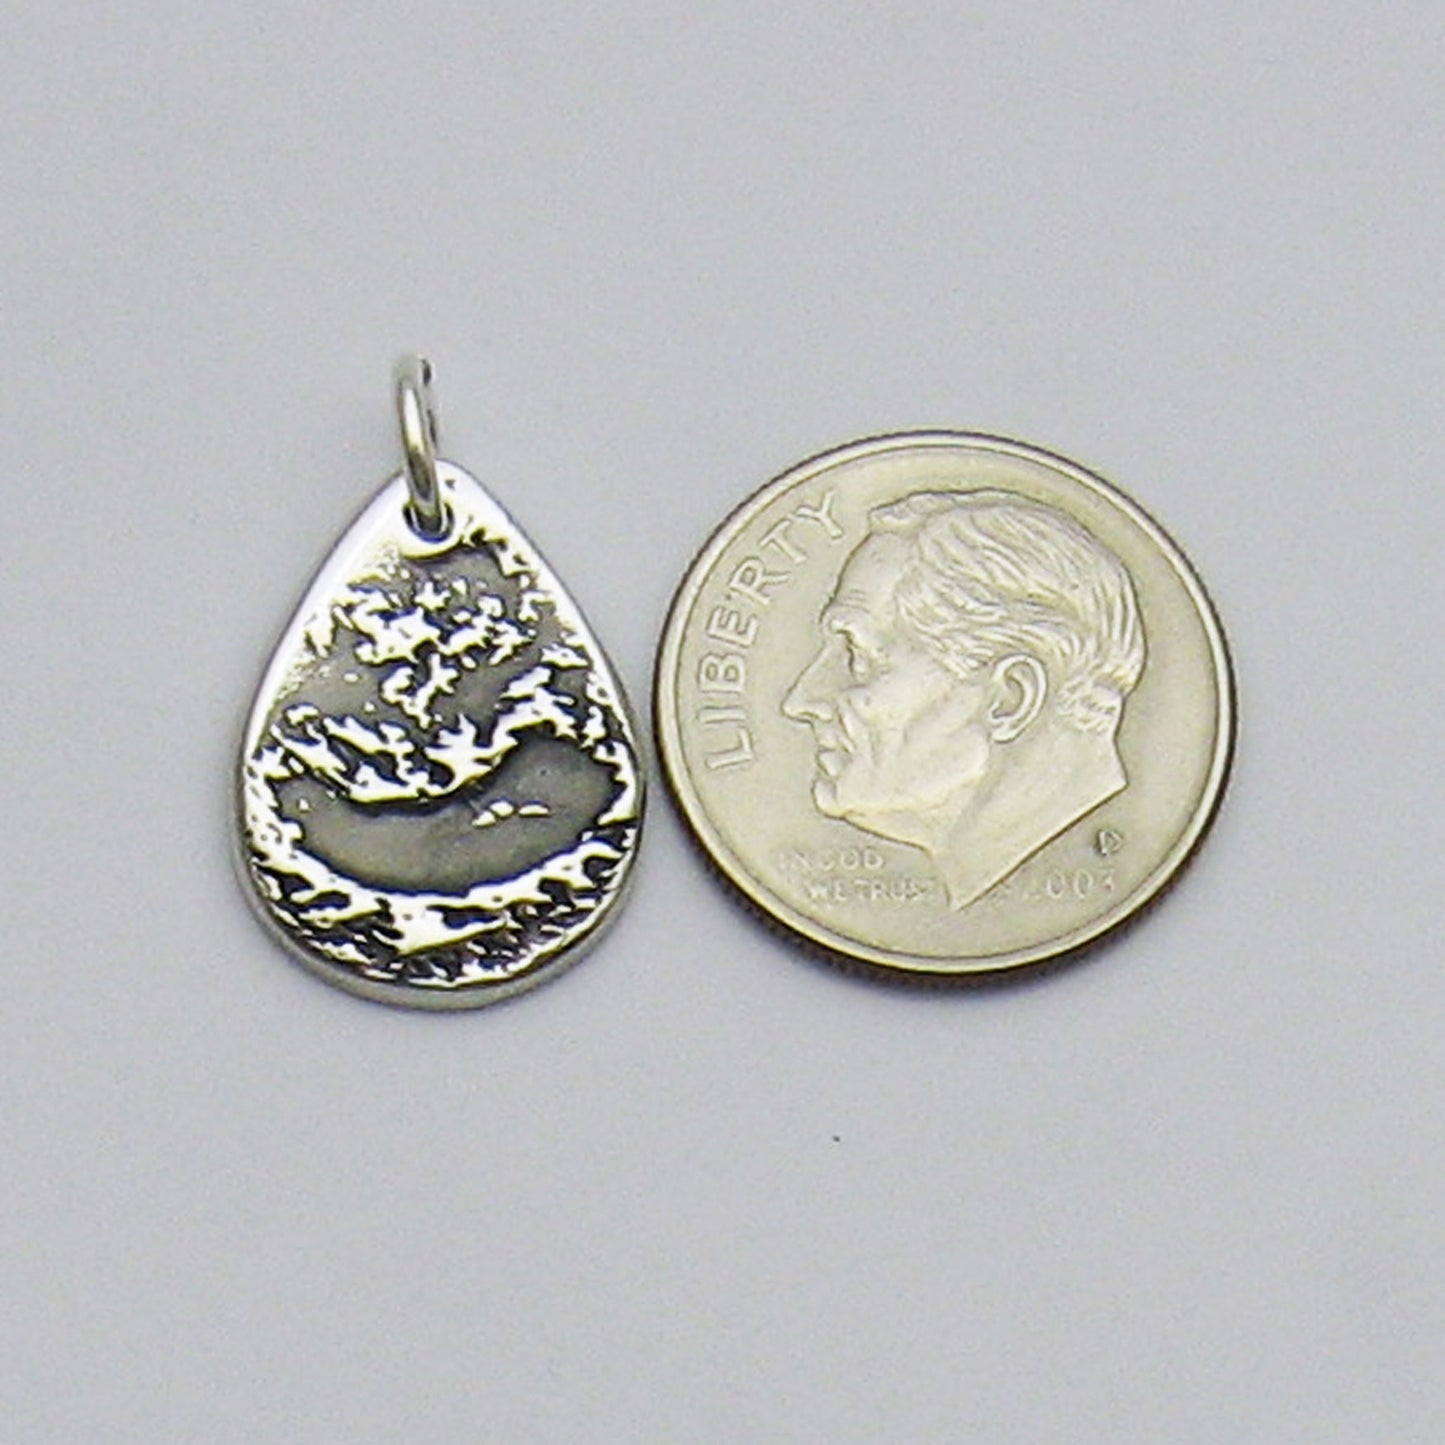 Ultrasound Teardrop Pendant Size Reference with dime